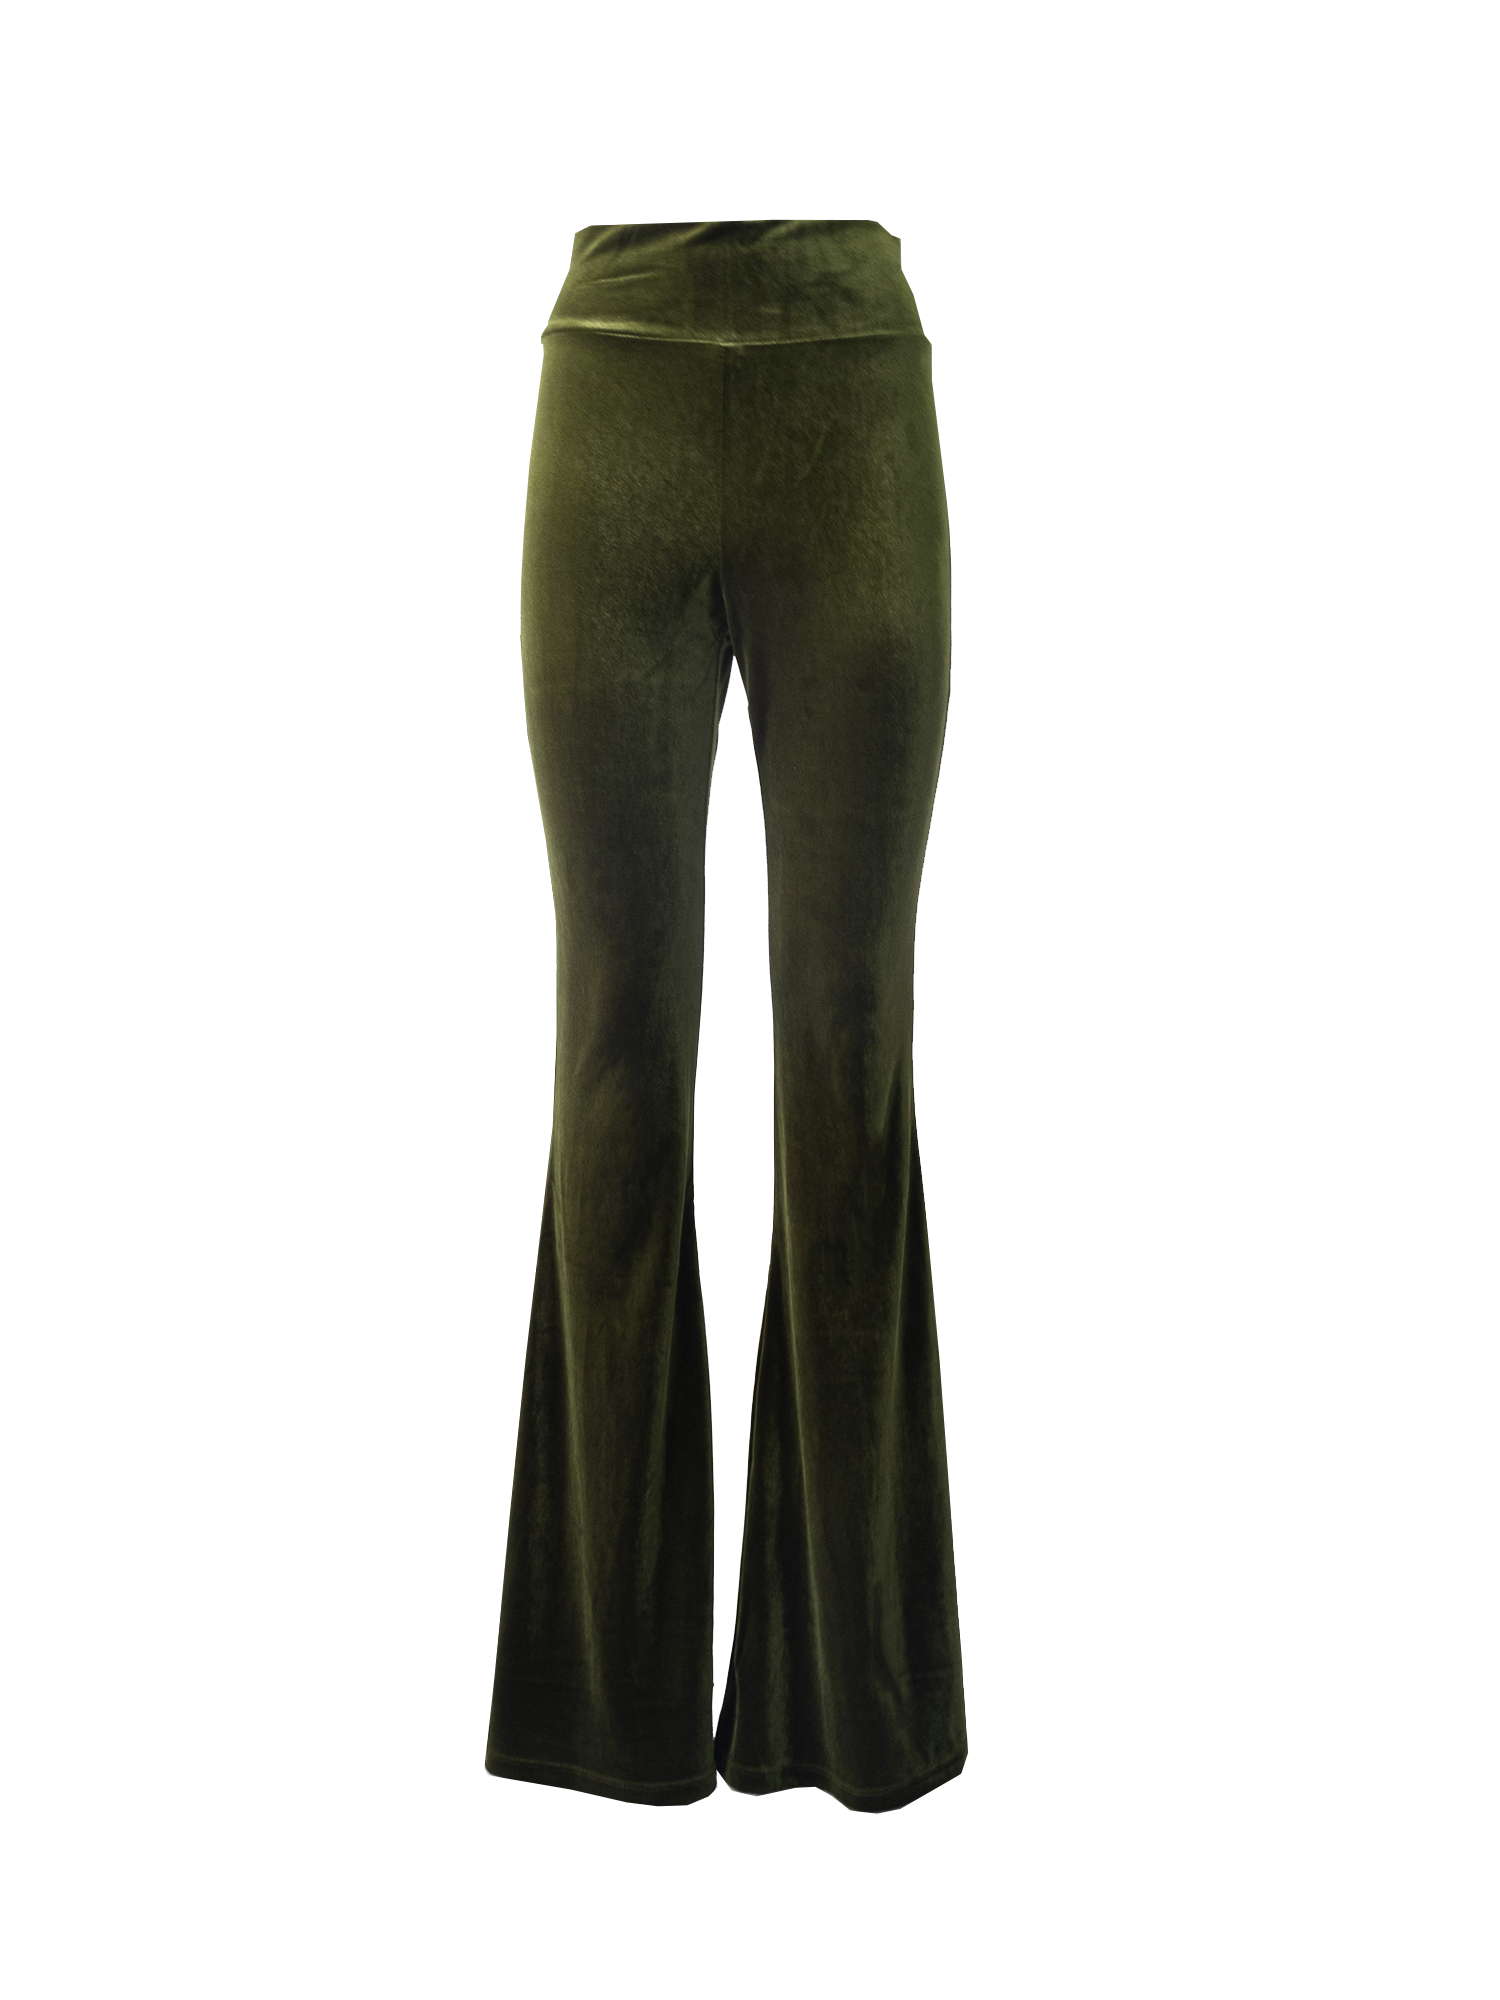 LOLA - flared trouser with high waist in green chenille